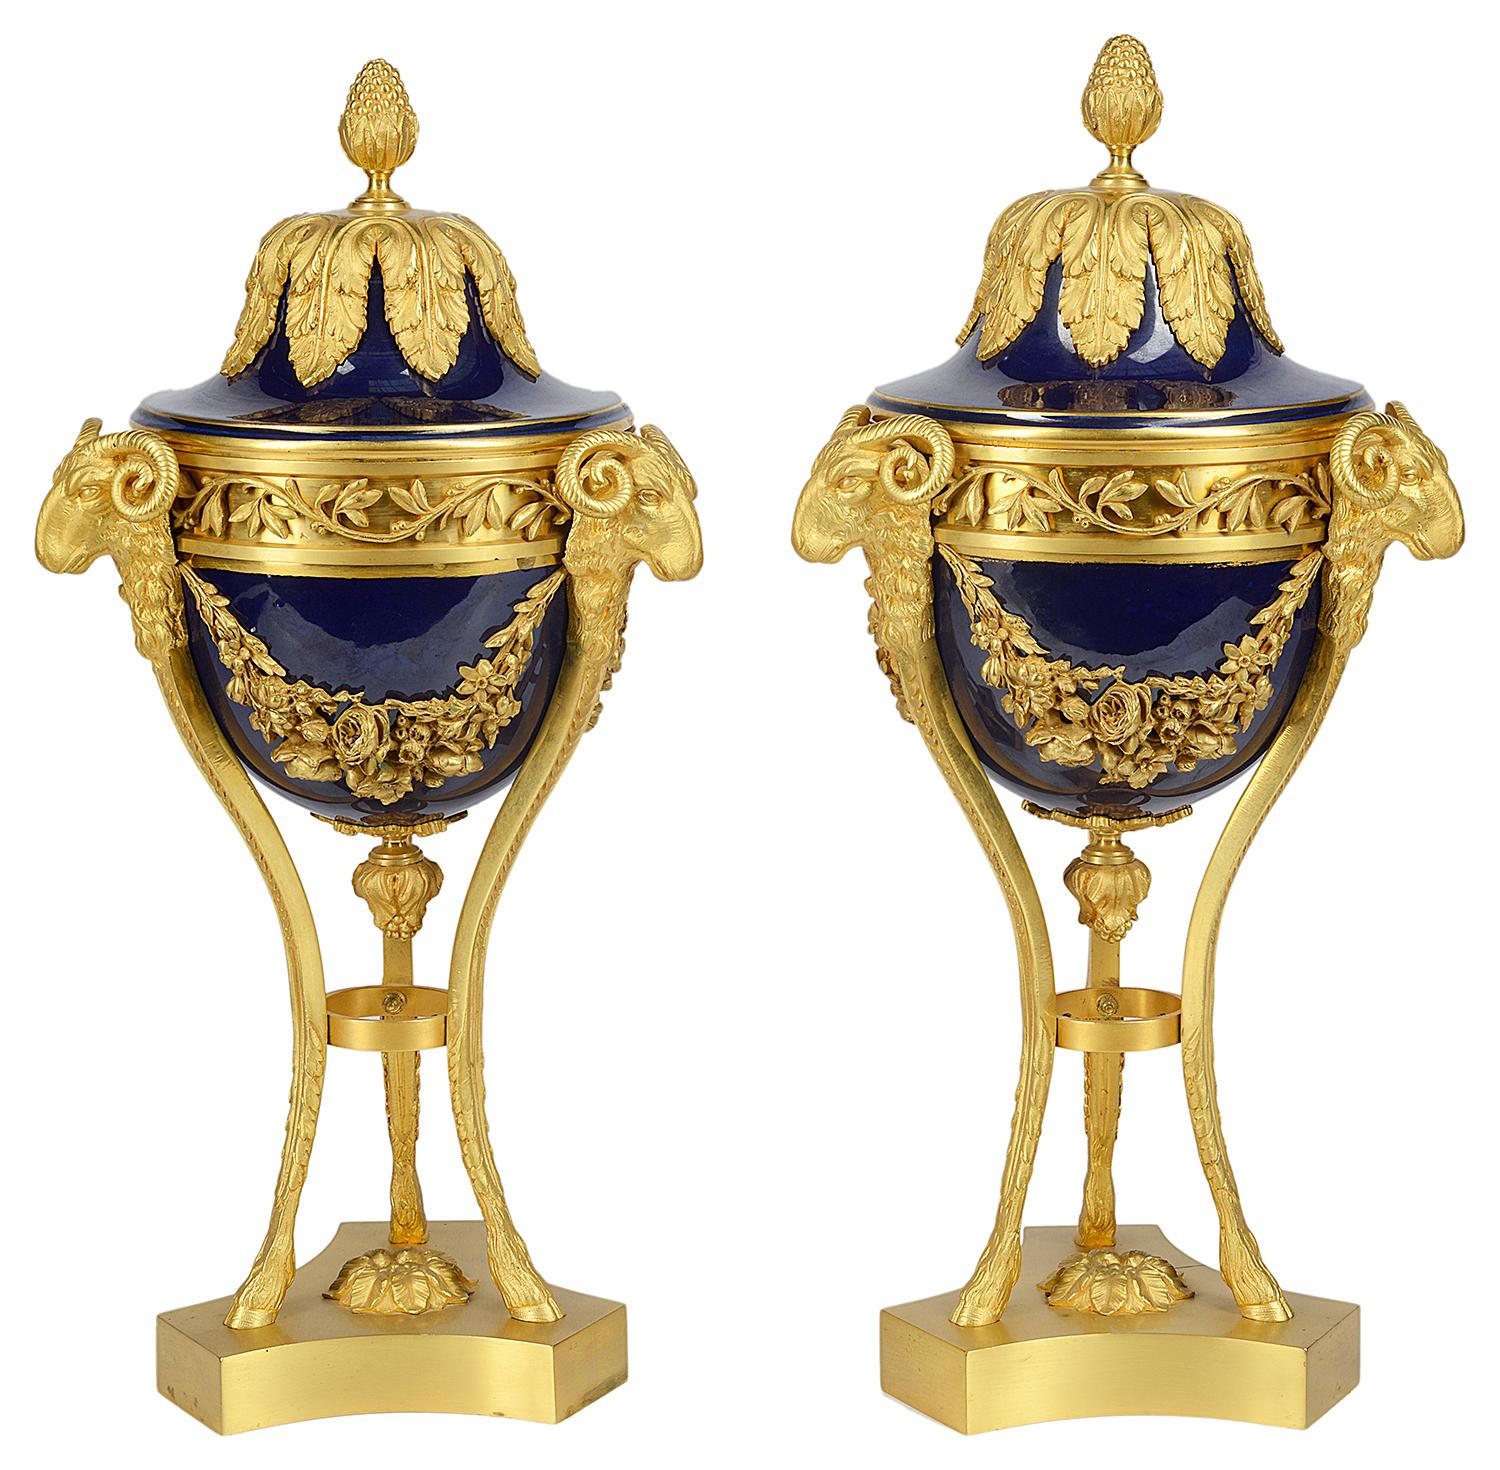 A good quality pair of early 20th century Sevres style lidded porcelain and gilded ormolu mounts. Each with classical foliate, swag and ram's head detail and raised on hoof feet.